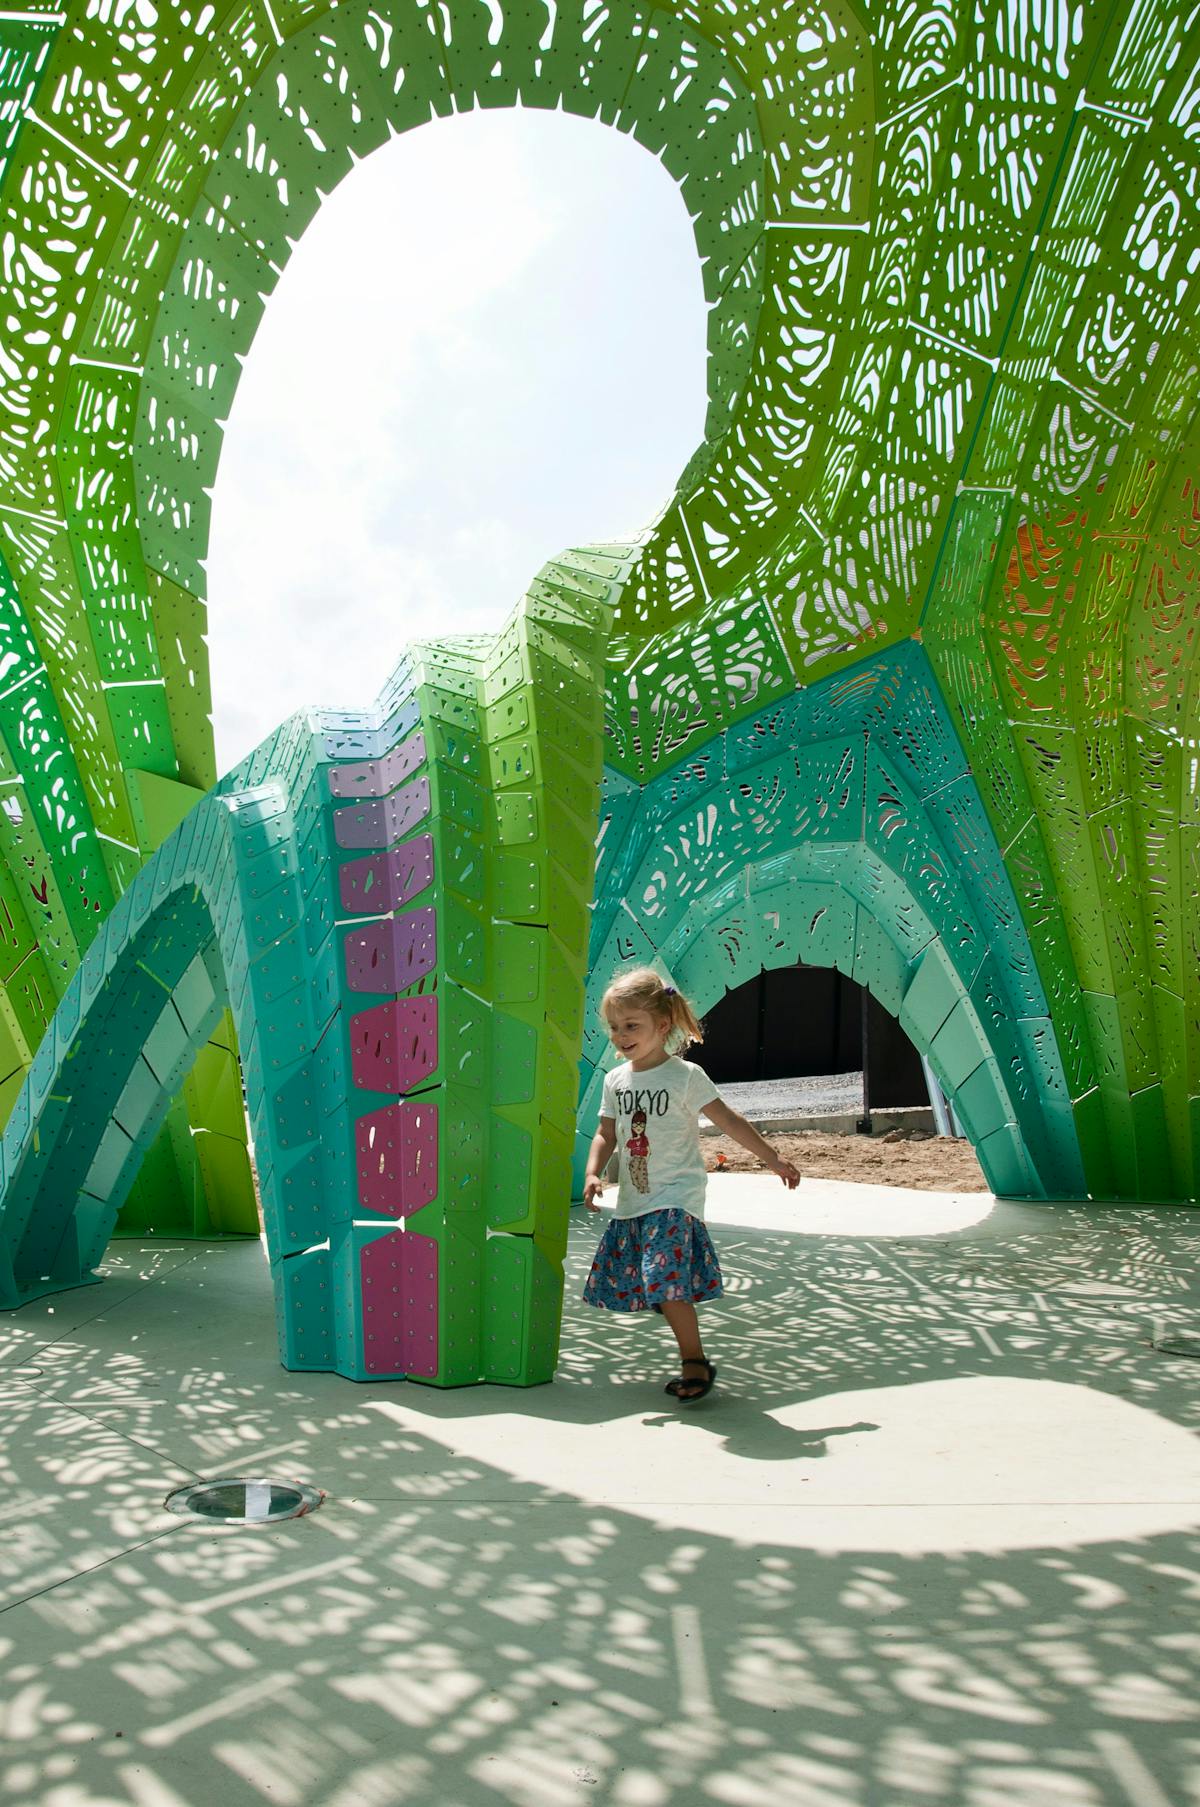 Pleated Inflation, MARC FORNES / THEVERYMANY